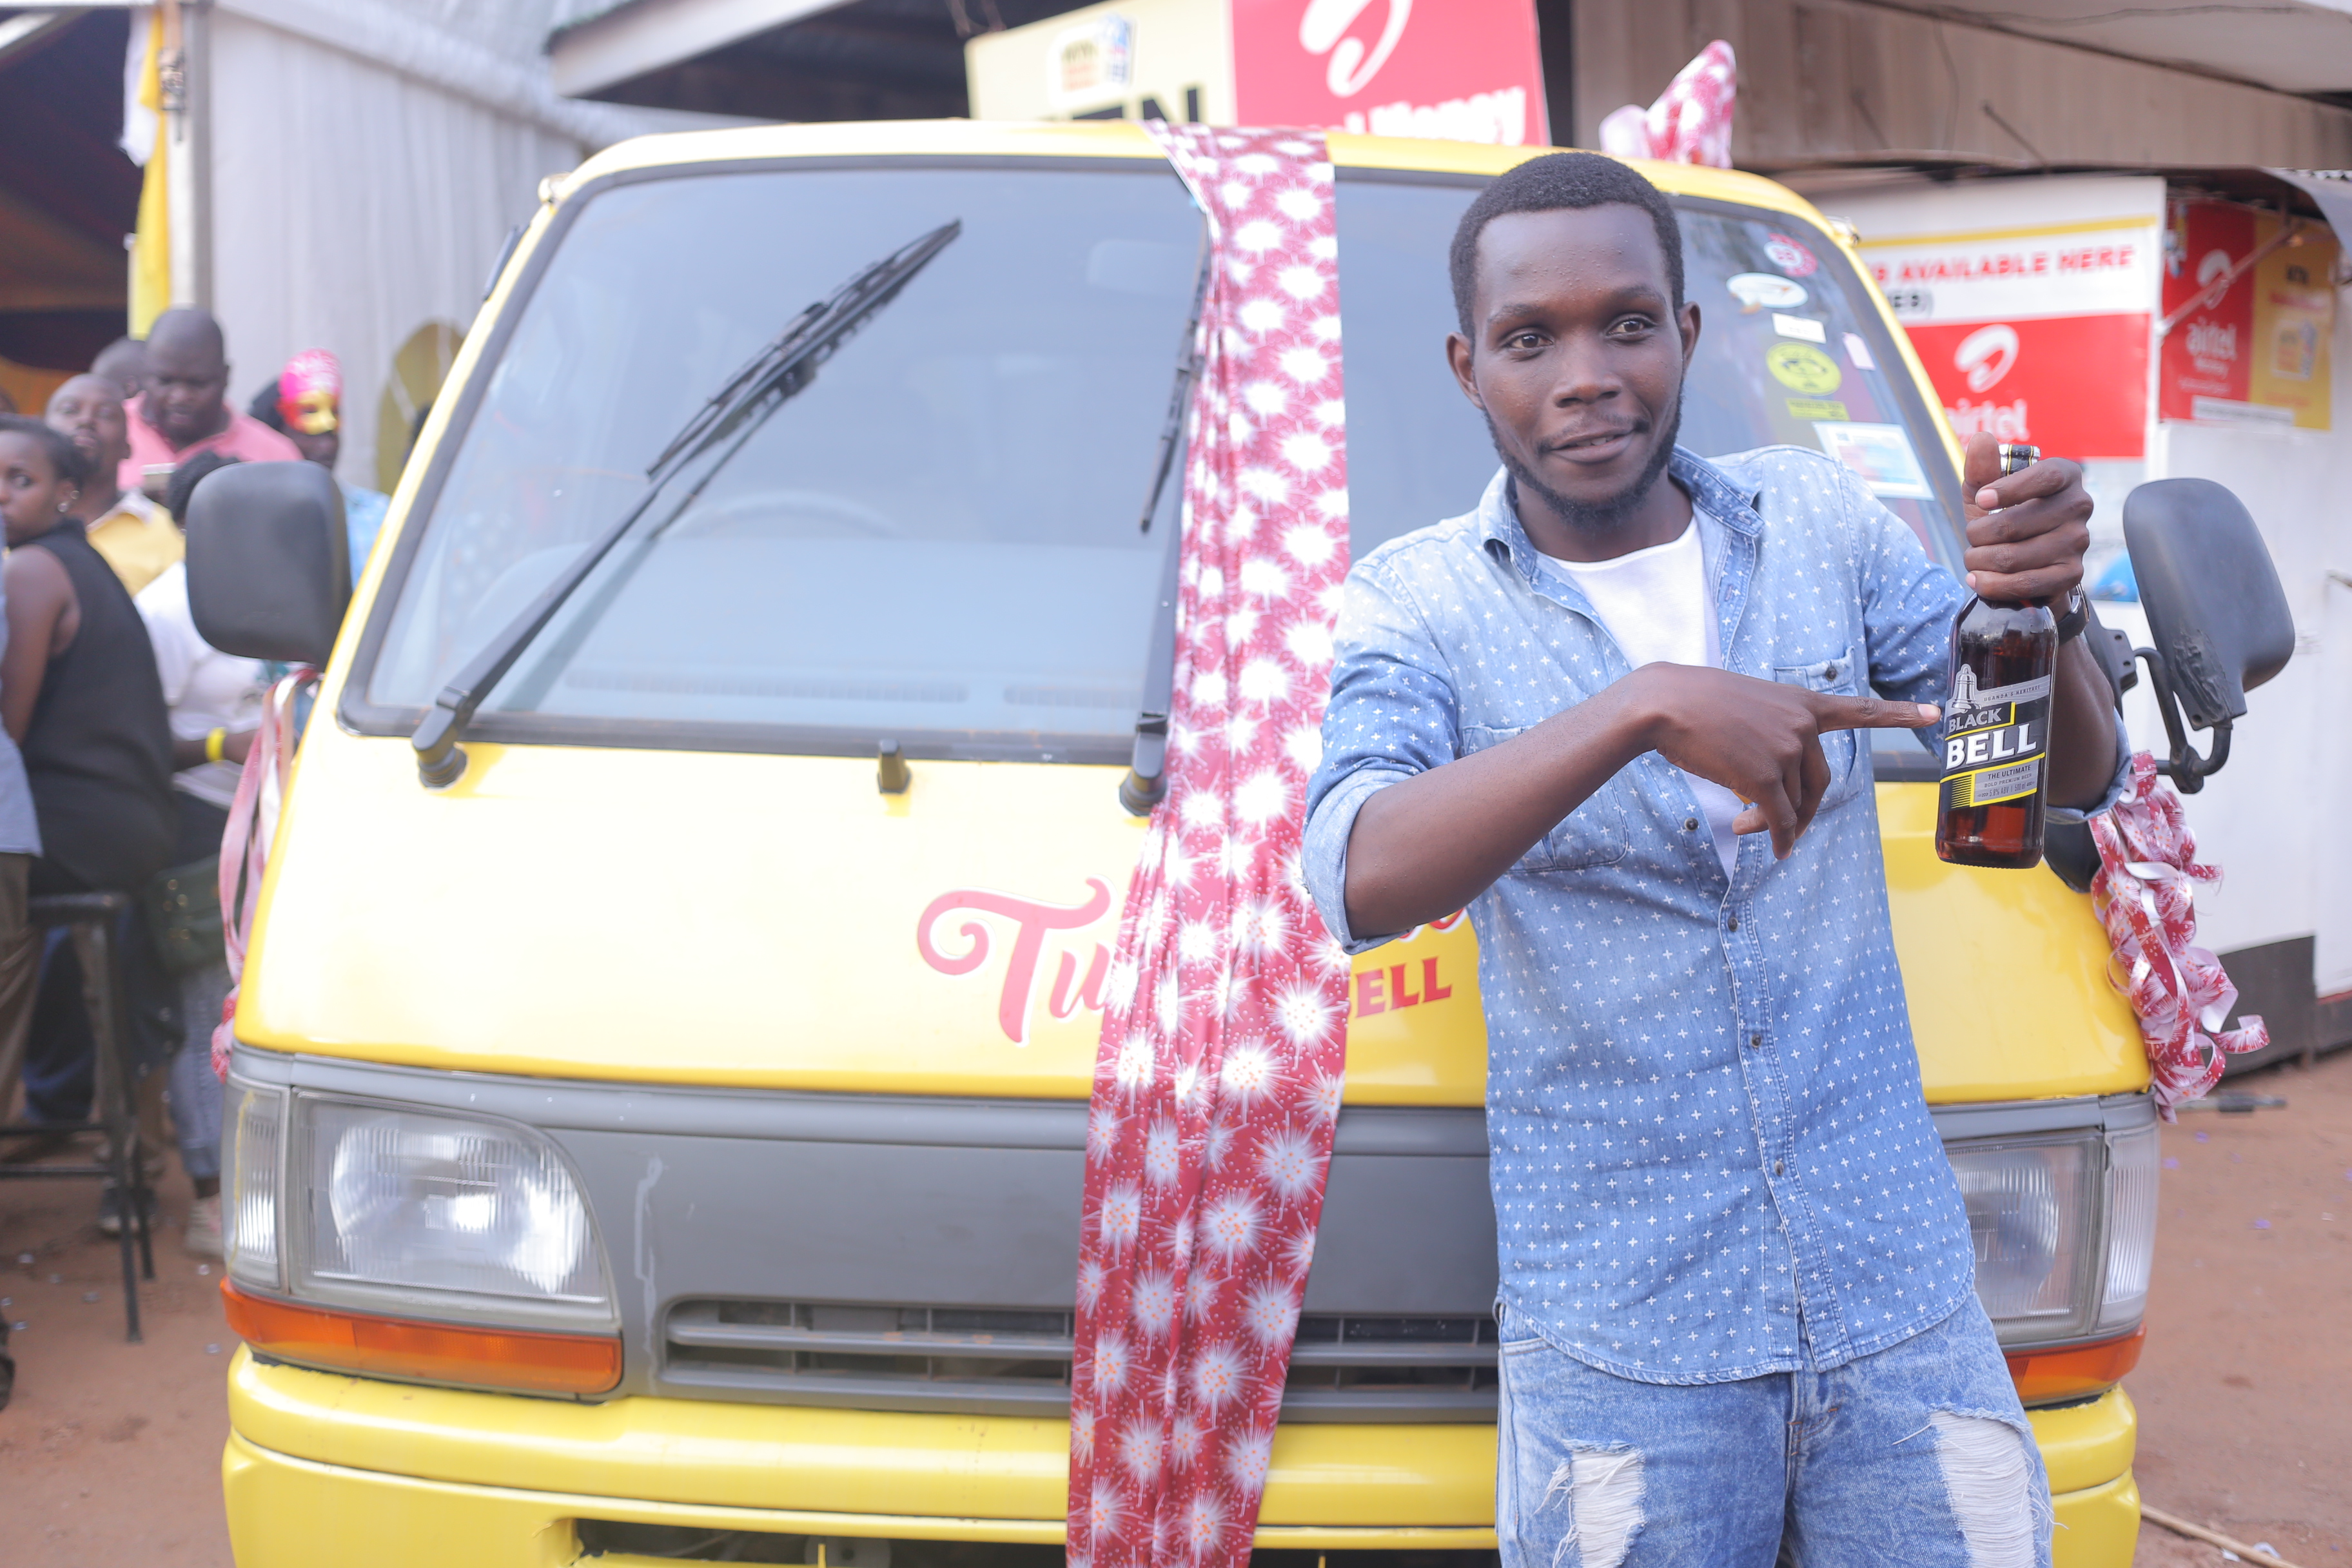 kato ibra showing off his brand new tubbaale van from the promotion